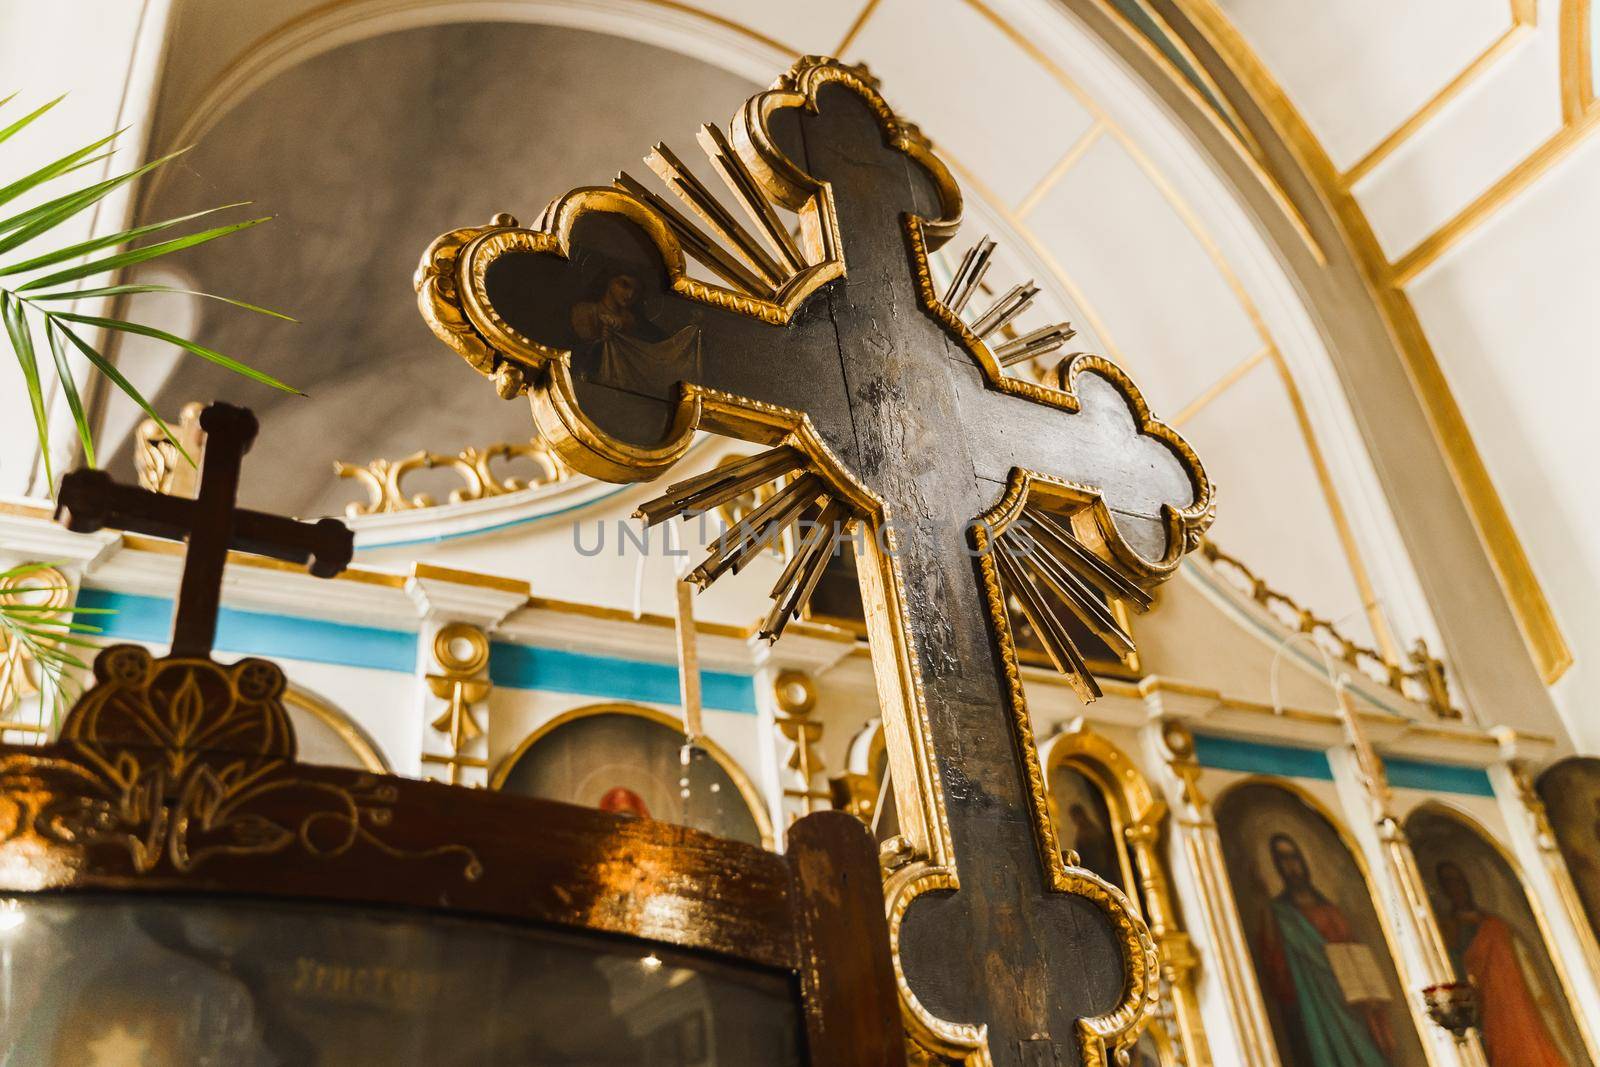 Huge Orthodox cross in the church interior. Orthodox tradition and faith. Equipment for praying. Pray for people life. Pray to god